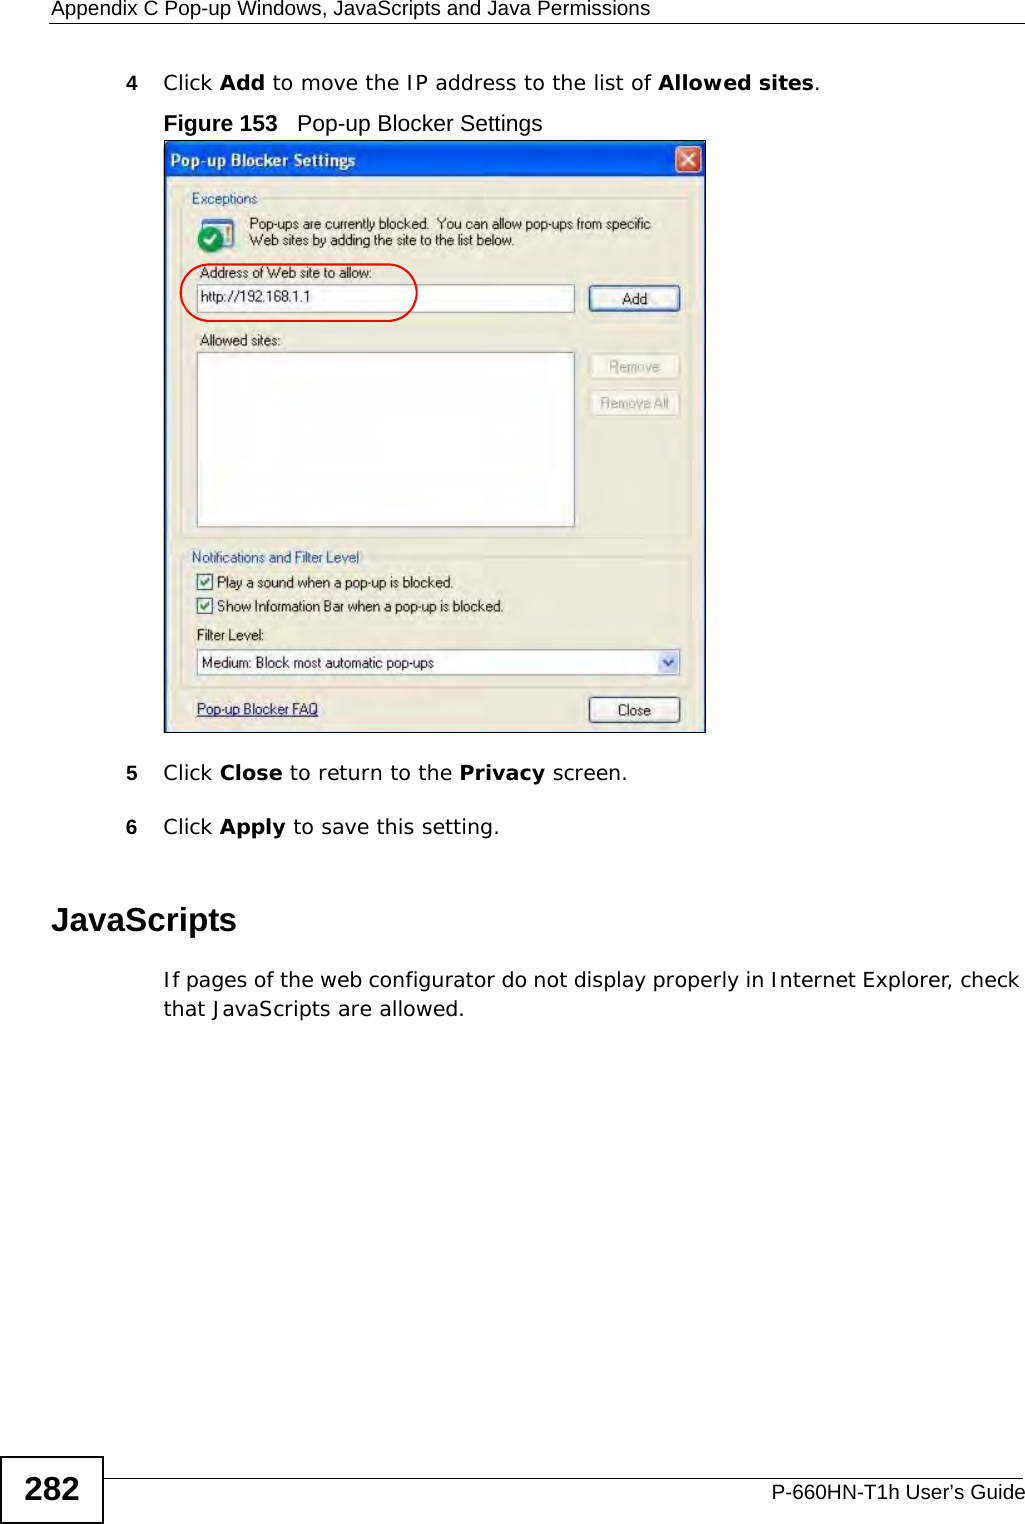 Appendix C Pop-up Windows, JavaScripts and Java PermissionsP-660HN-T1h User’s Guide2824Click Add to move the IP address to the list of Allowed sites.Figure 153   Pop-up Blocker Settings5Click Close to return to the Privacy screen. 6Click Apply to save this setting. JavaScriptsIf pages of the web configurator do not display properly in Internet Explorer, check that JavaScripts are allowed. 